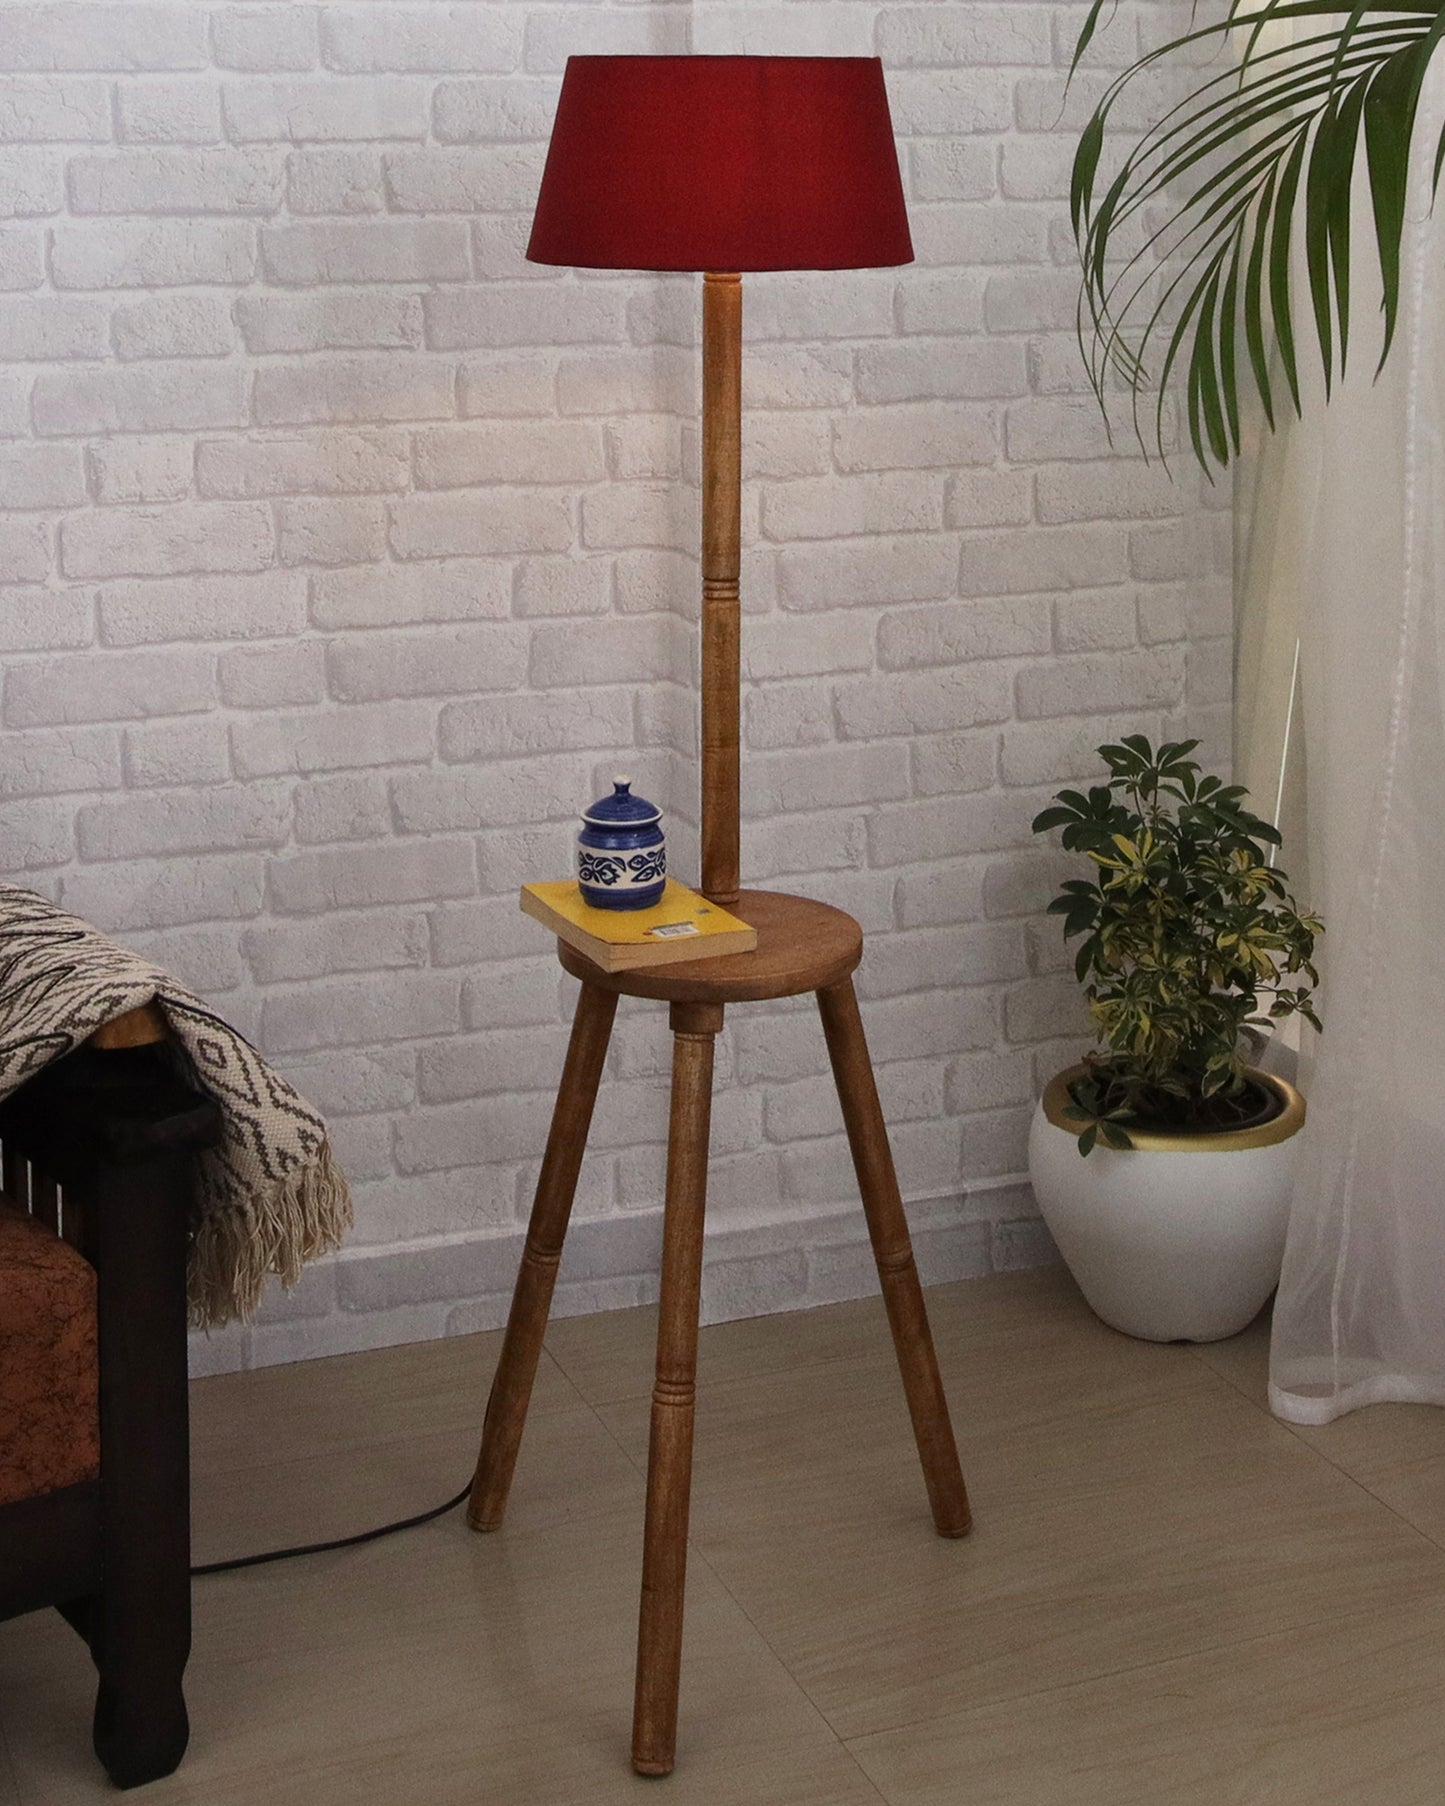 Table,Tripod Wooden Floor Lamp, Mid Century Standing Lamp, E27 Lamp Base, With Shade Modern Design Floor Reading Lamp for Living Room Bedroom, Study Room and Office